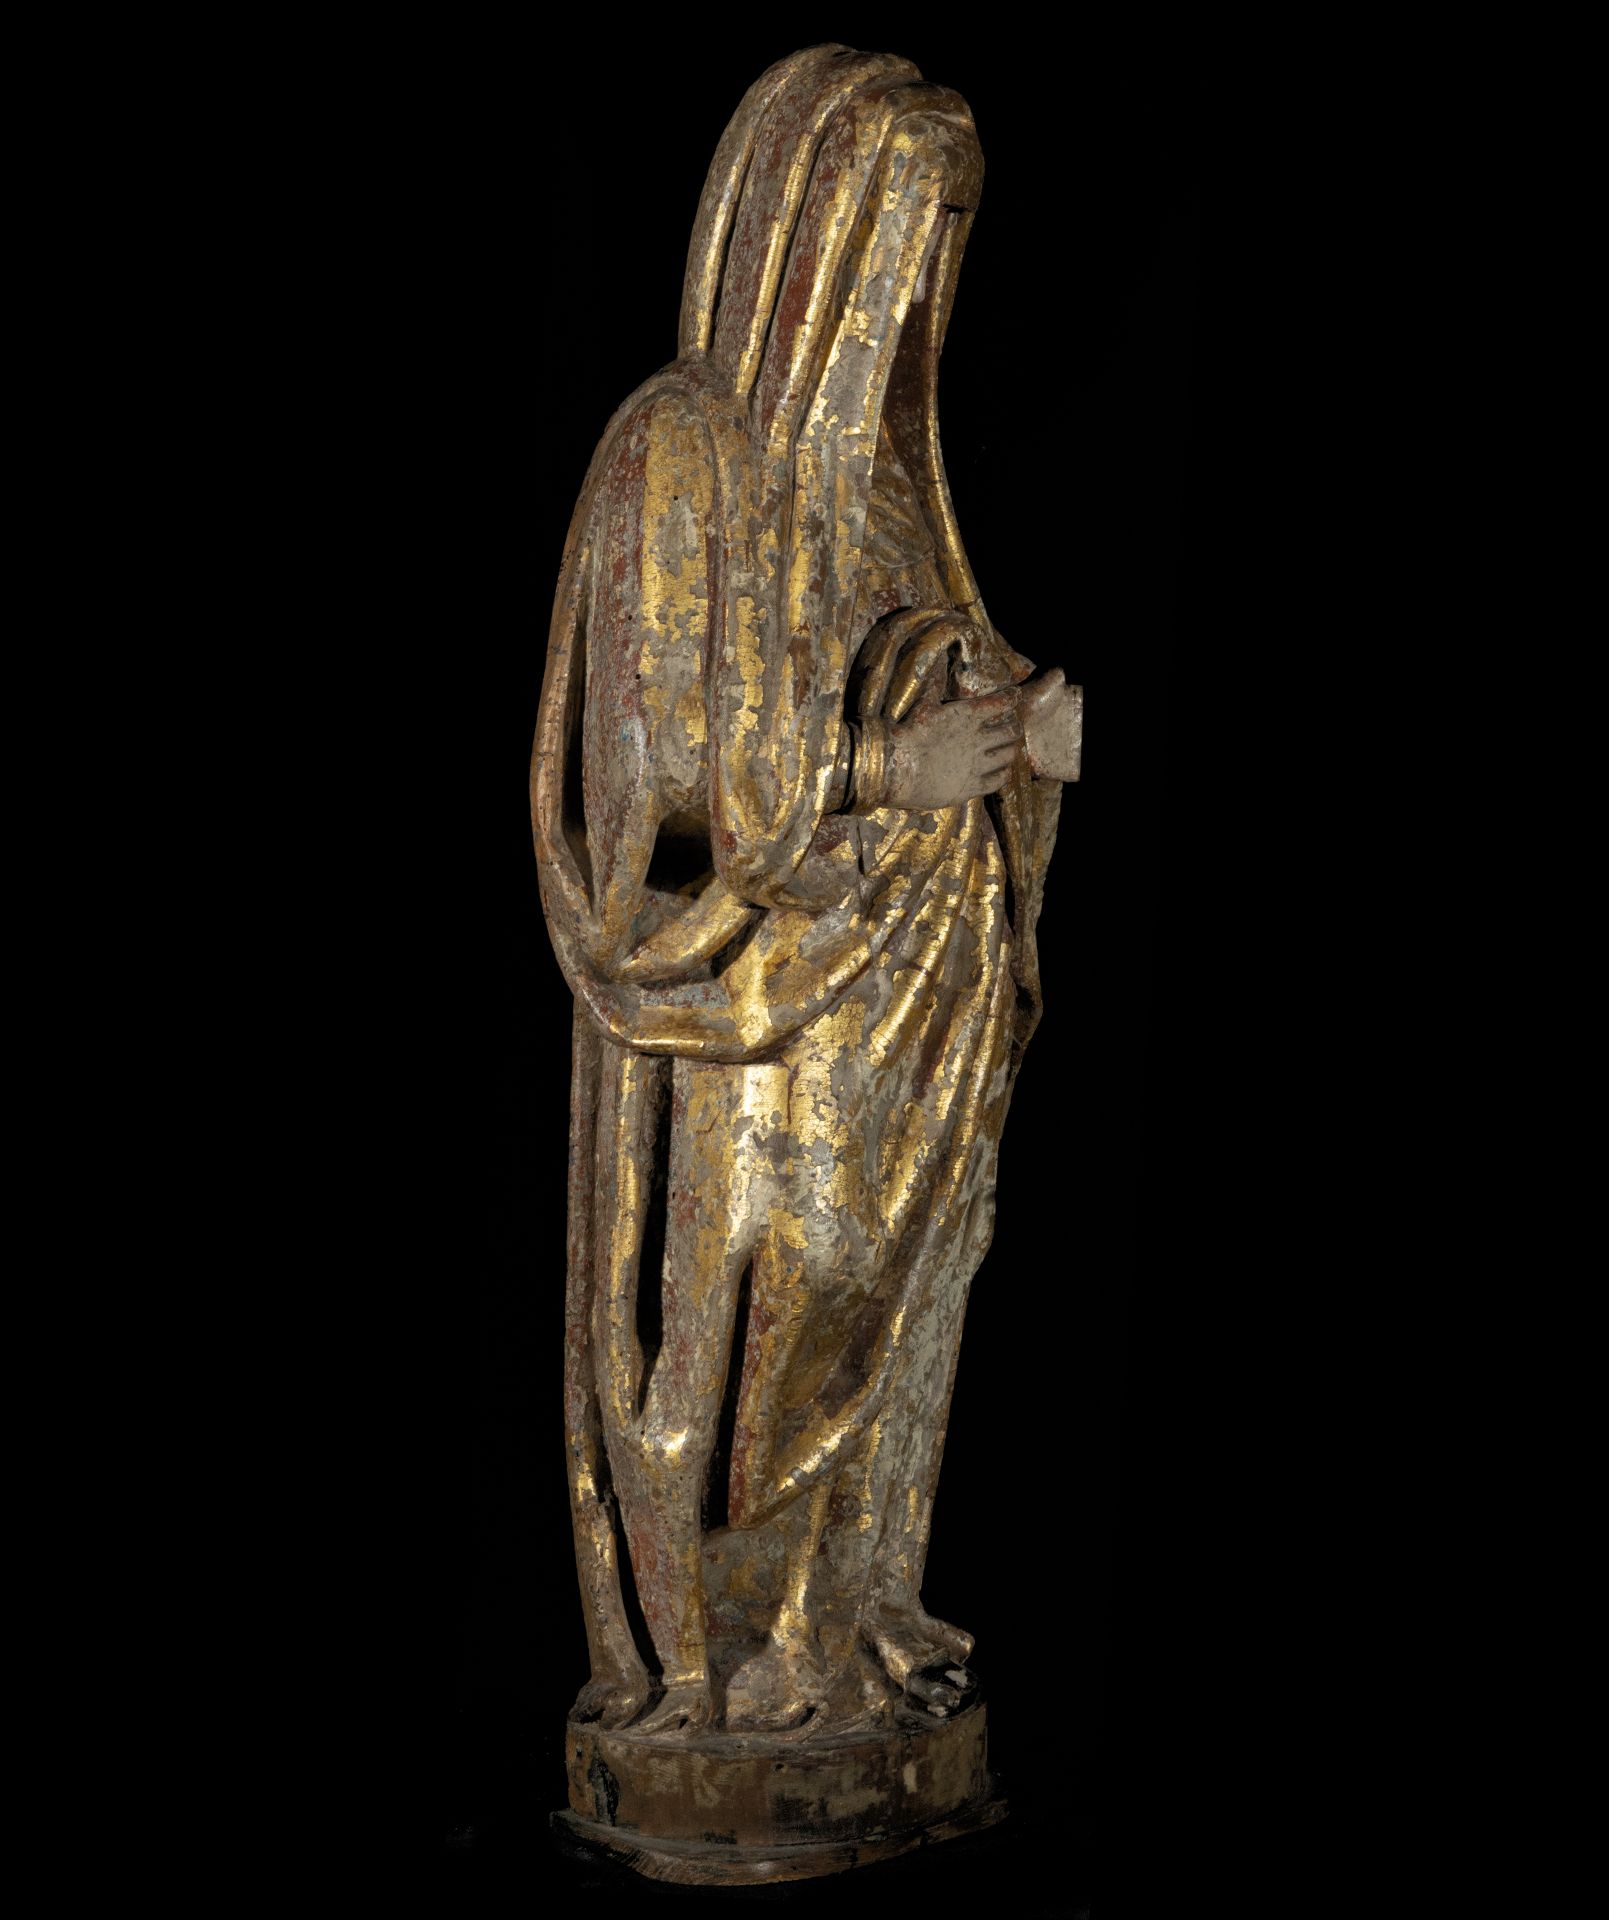 Brabant school of the 15th century - early 16th century, Great Virgin Sorrowful - Image 6 of 8